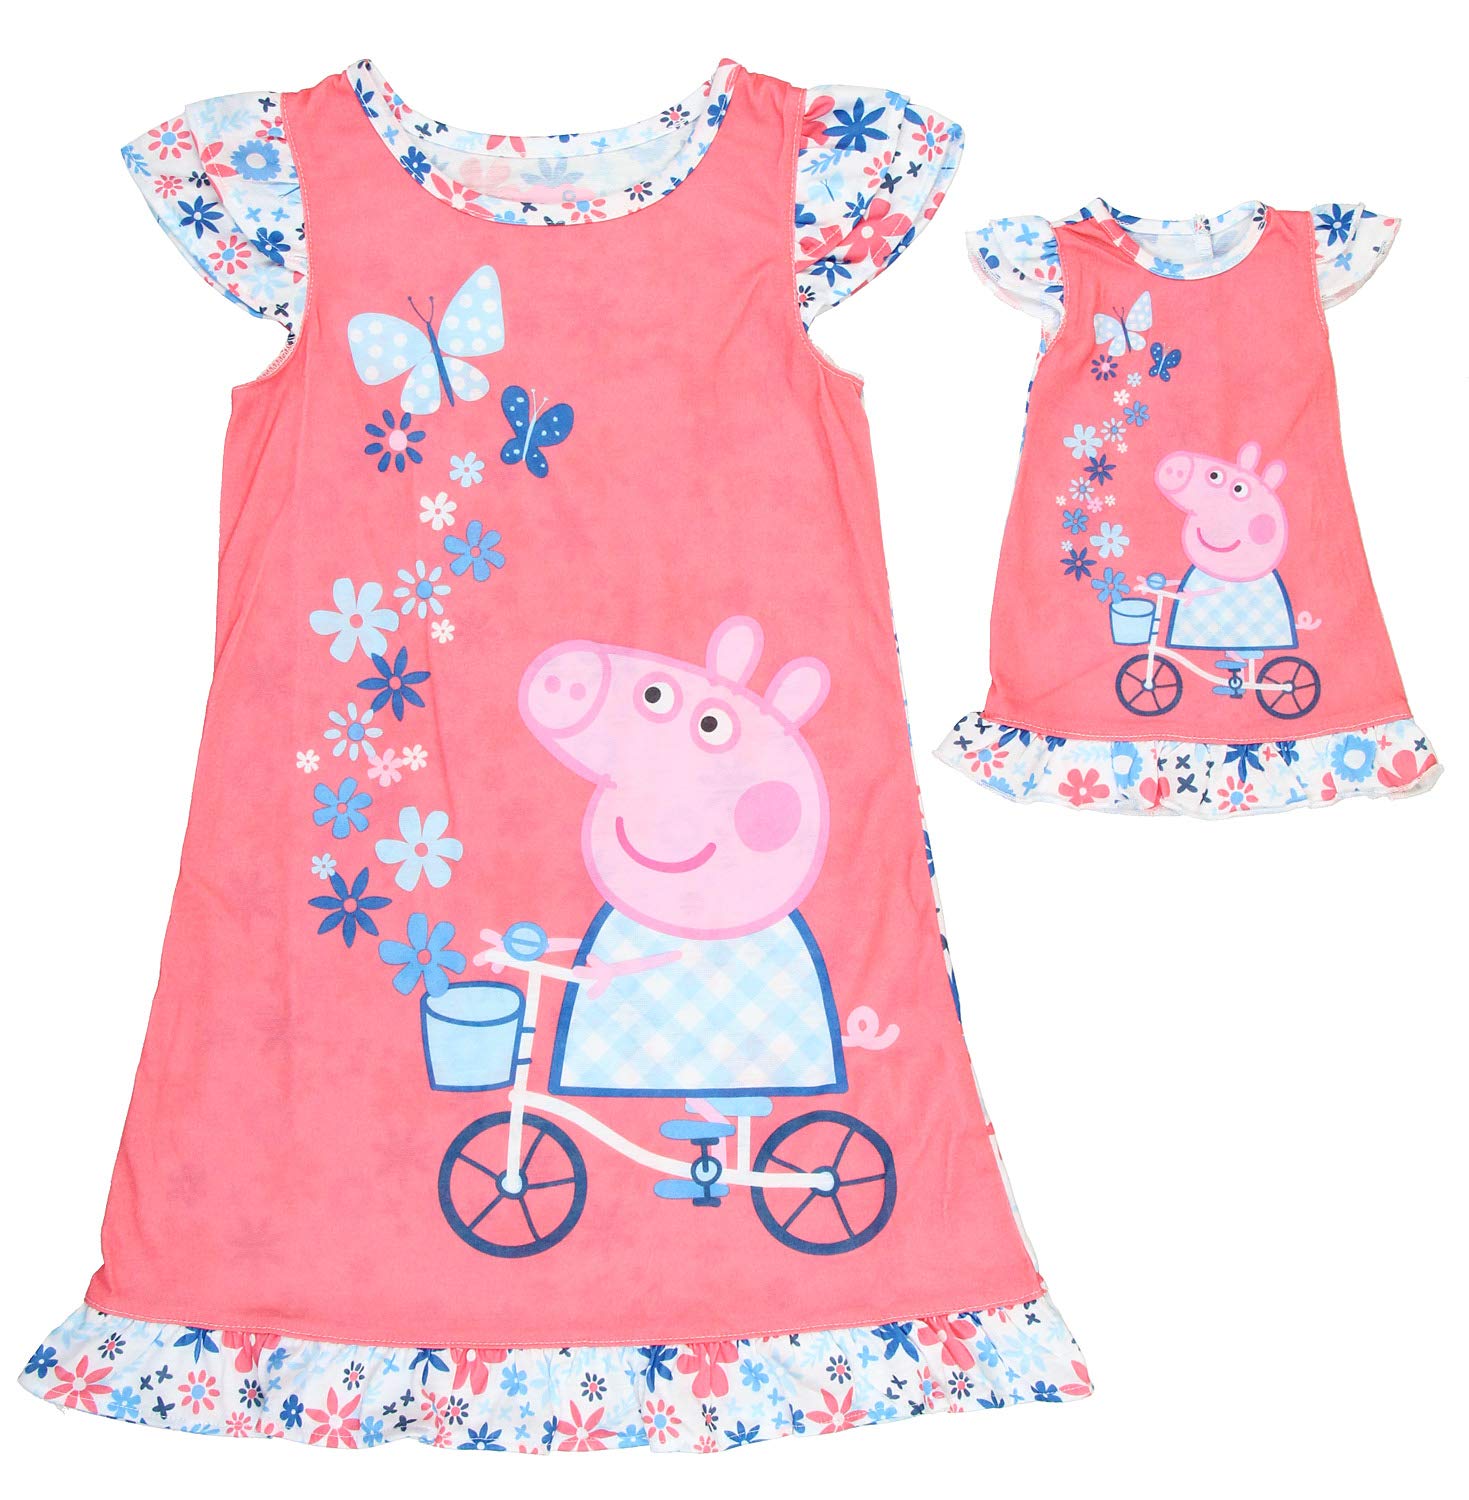 Seven Times Six Peppa Pig Toddler Girls Pajamas Nightgown With Matching Doll Gown Set